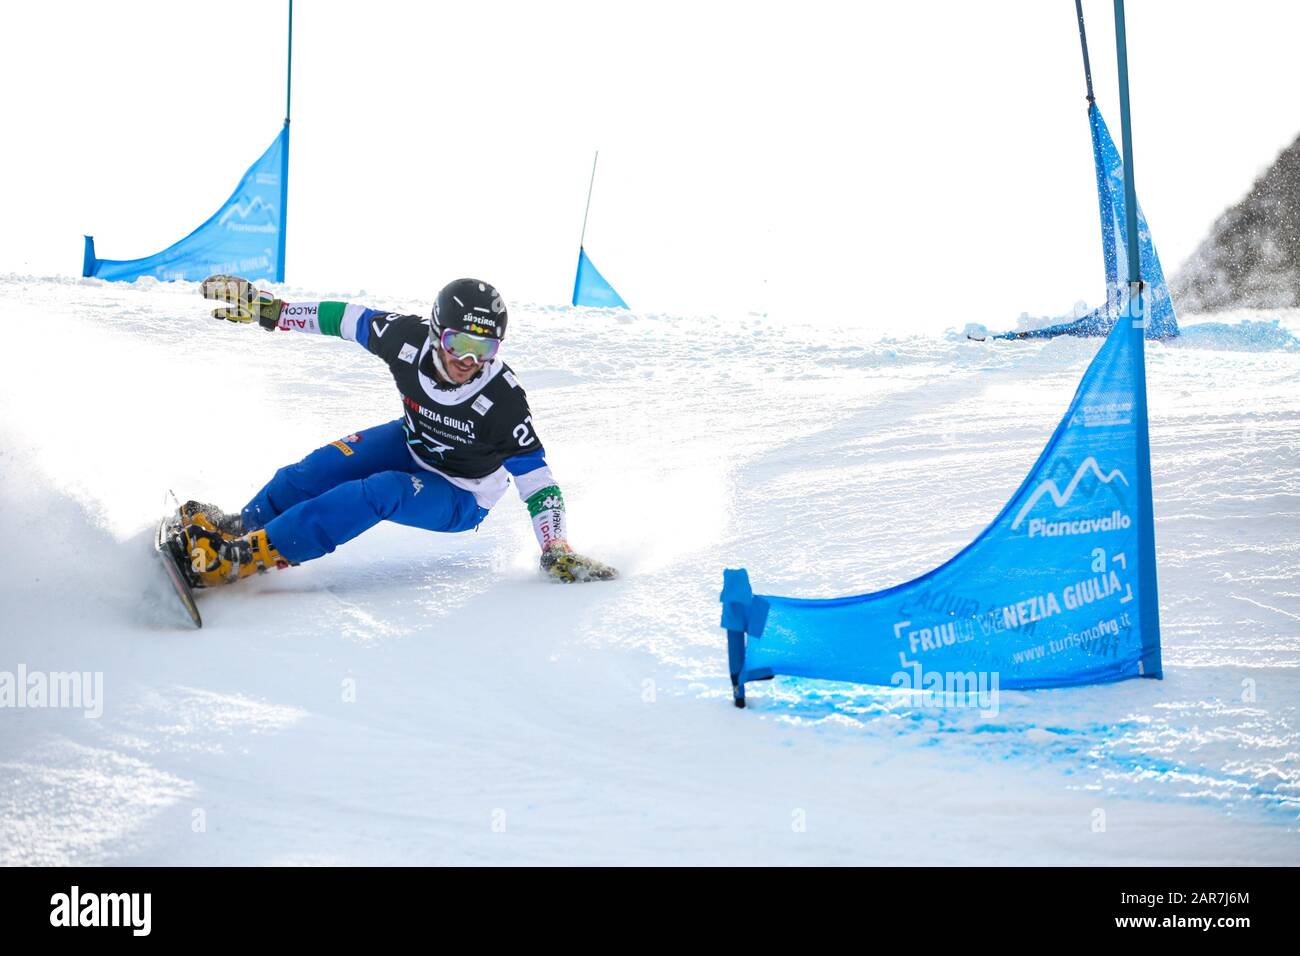 march aaron ita during FIS Snowboard World Cup - Parallel Slalom PSL, Piancavallo - Aviano (PN), Italy, 25 Jan 2020, Winter Sports Snowboard Stock Photo